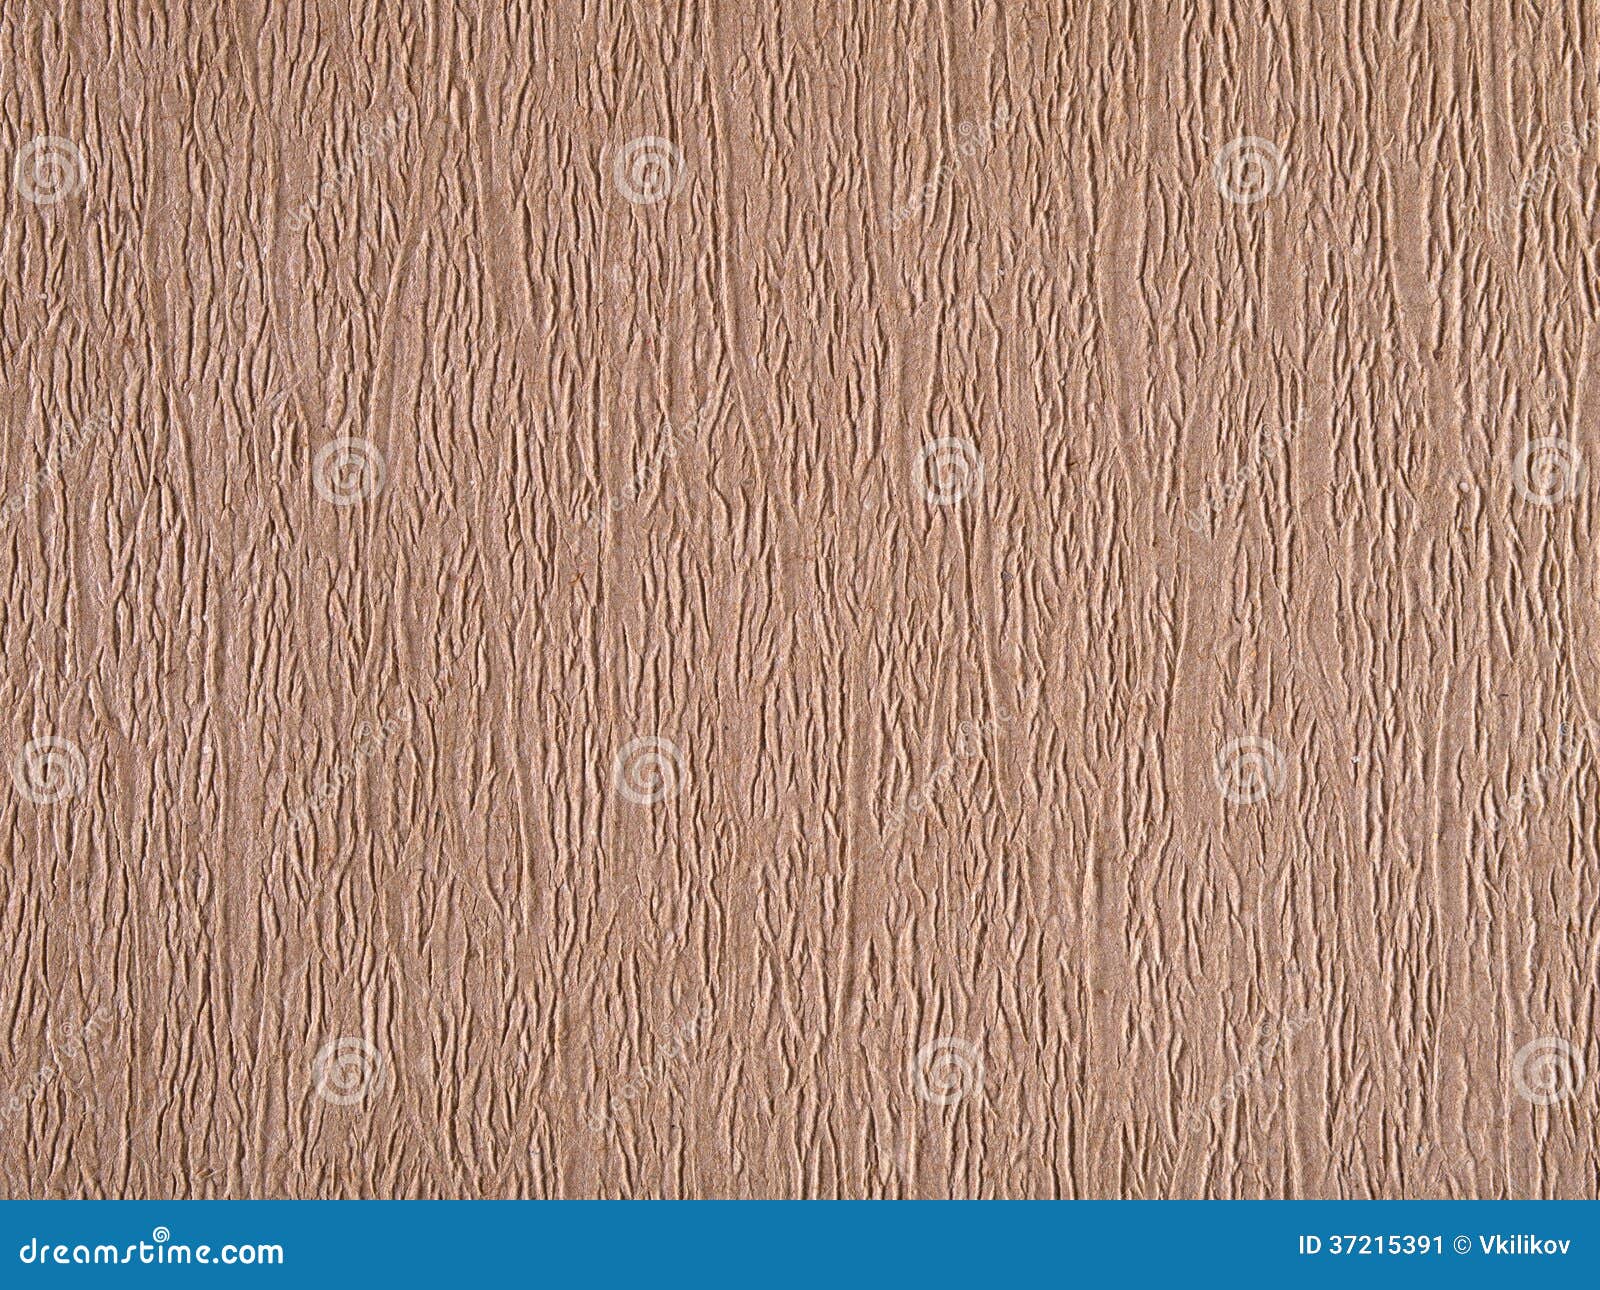 Texture of corrugated paper. Texture background of beige corrugated paper